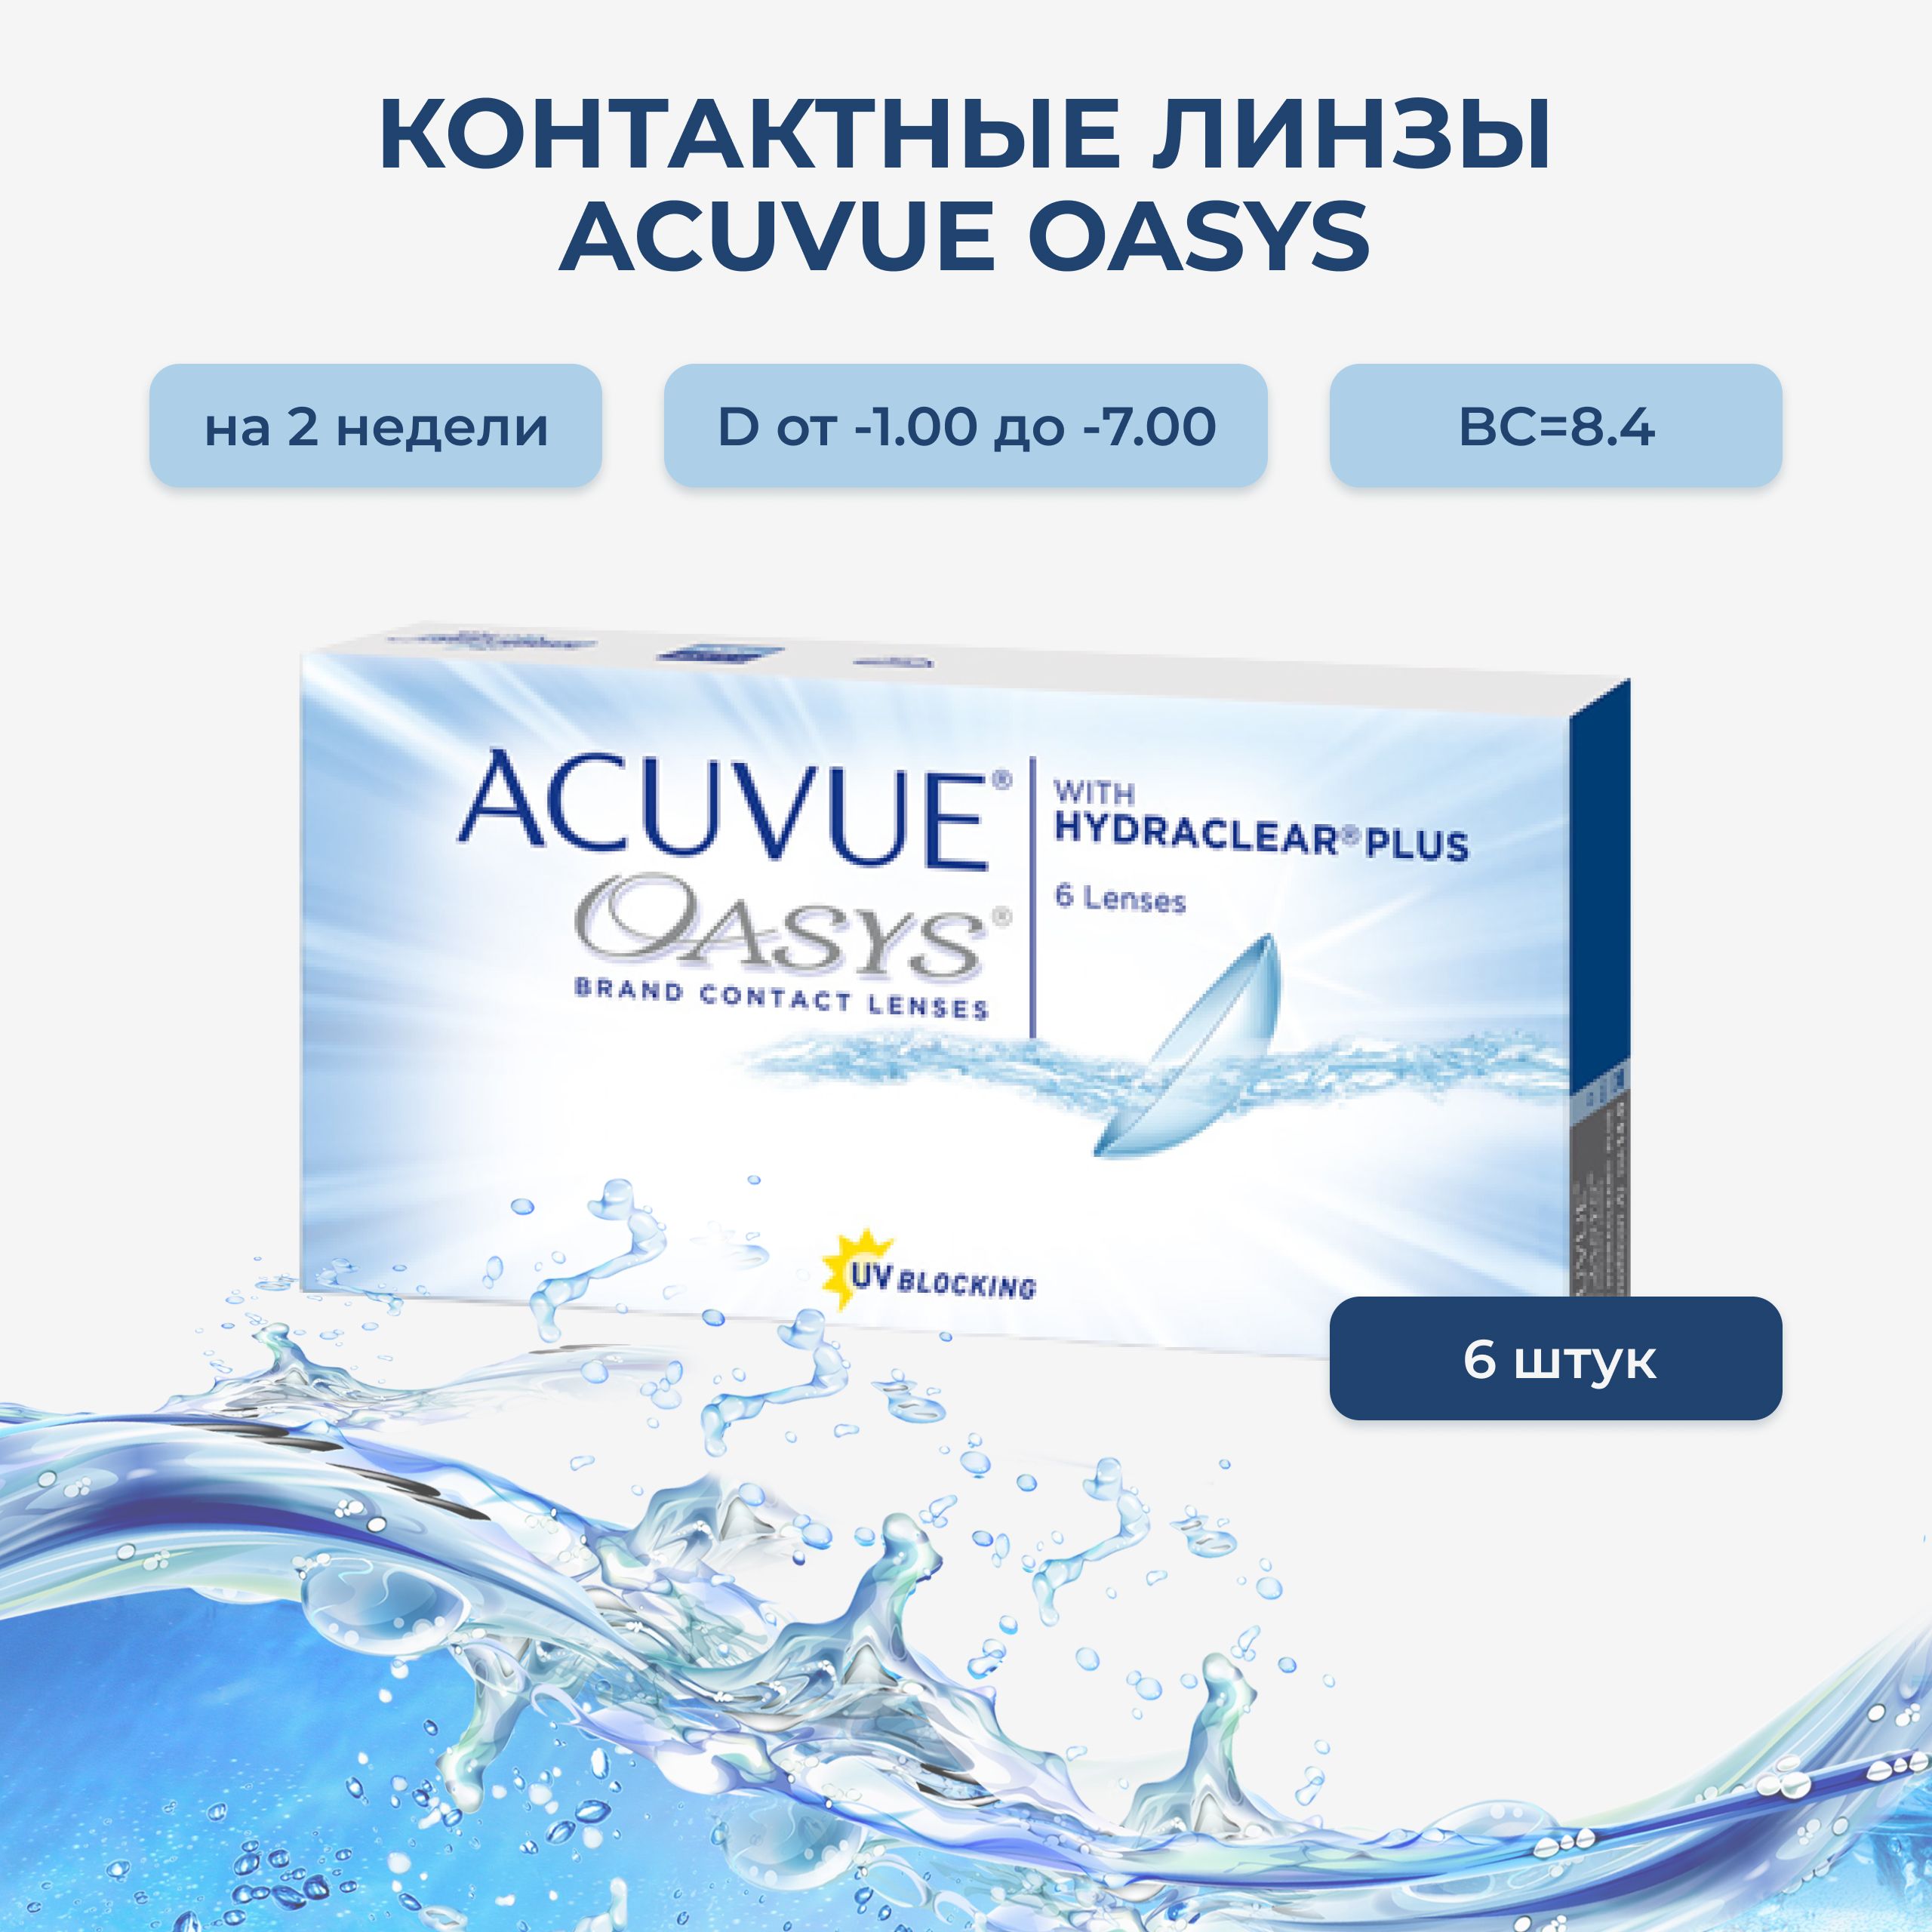 Acuvue oasys недельные. Acuvue Oasys with Hydraclear 2 недели. Acuvue Oasys with Hydraclear Plus 6 шт. Acuvue Oasys Hydraclear Plus. Acuvue Oasys 2 недельные.